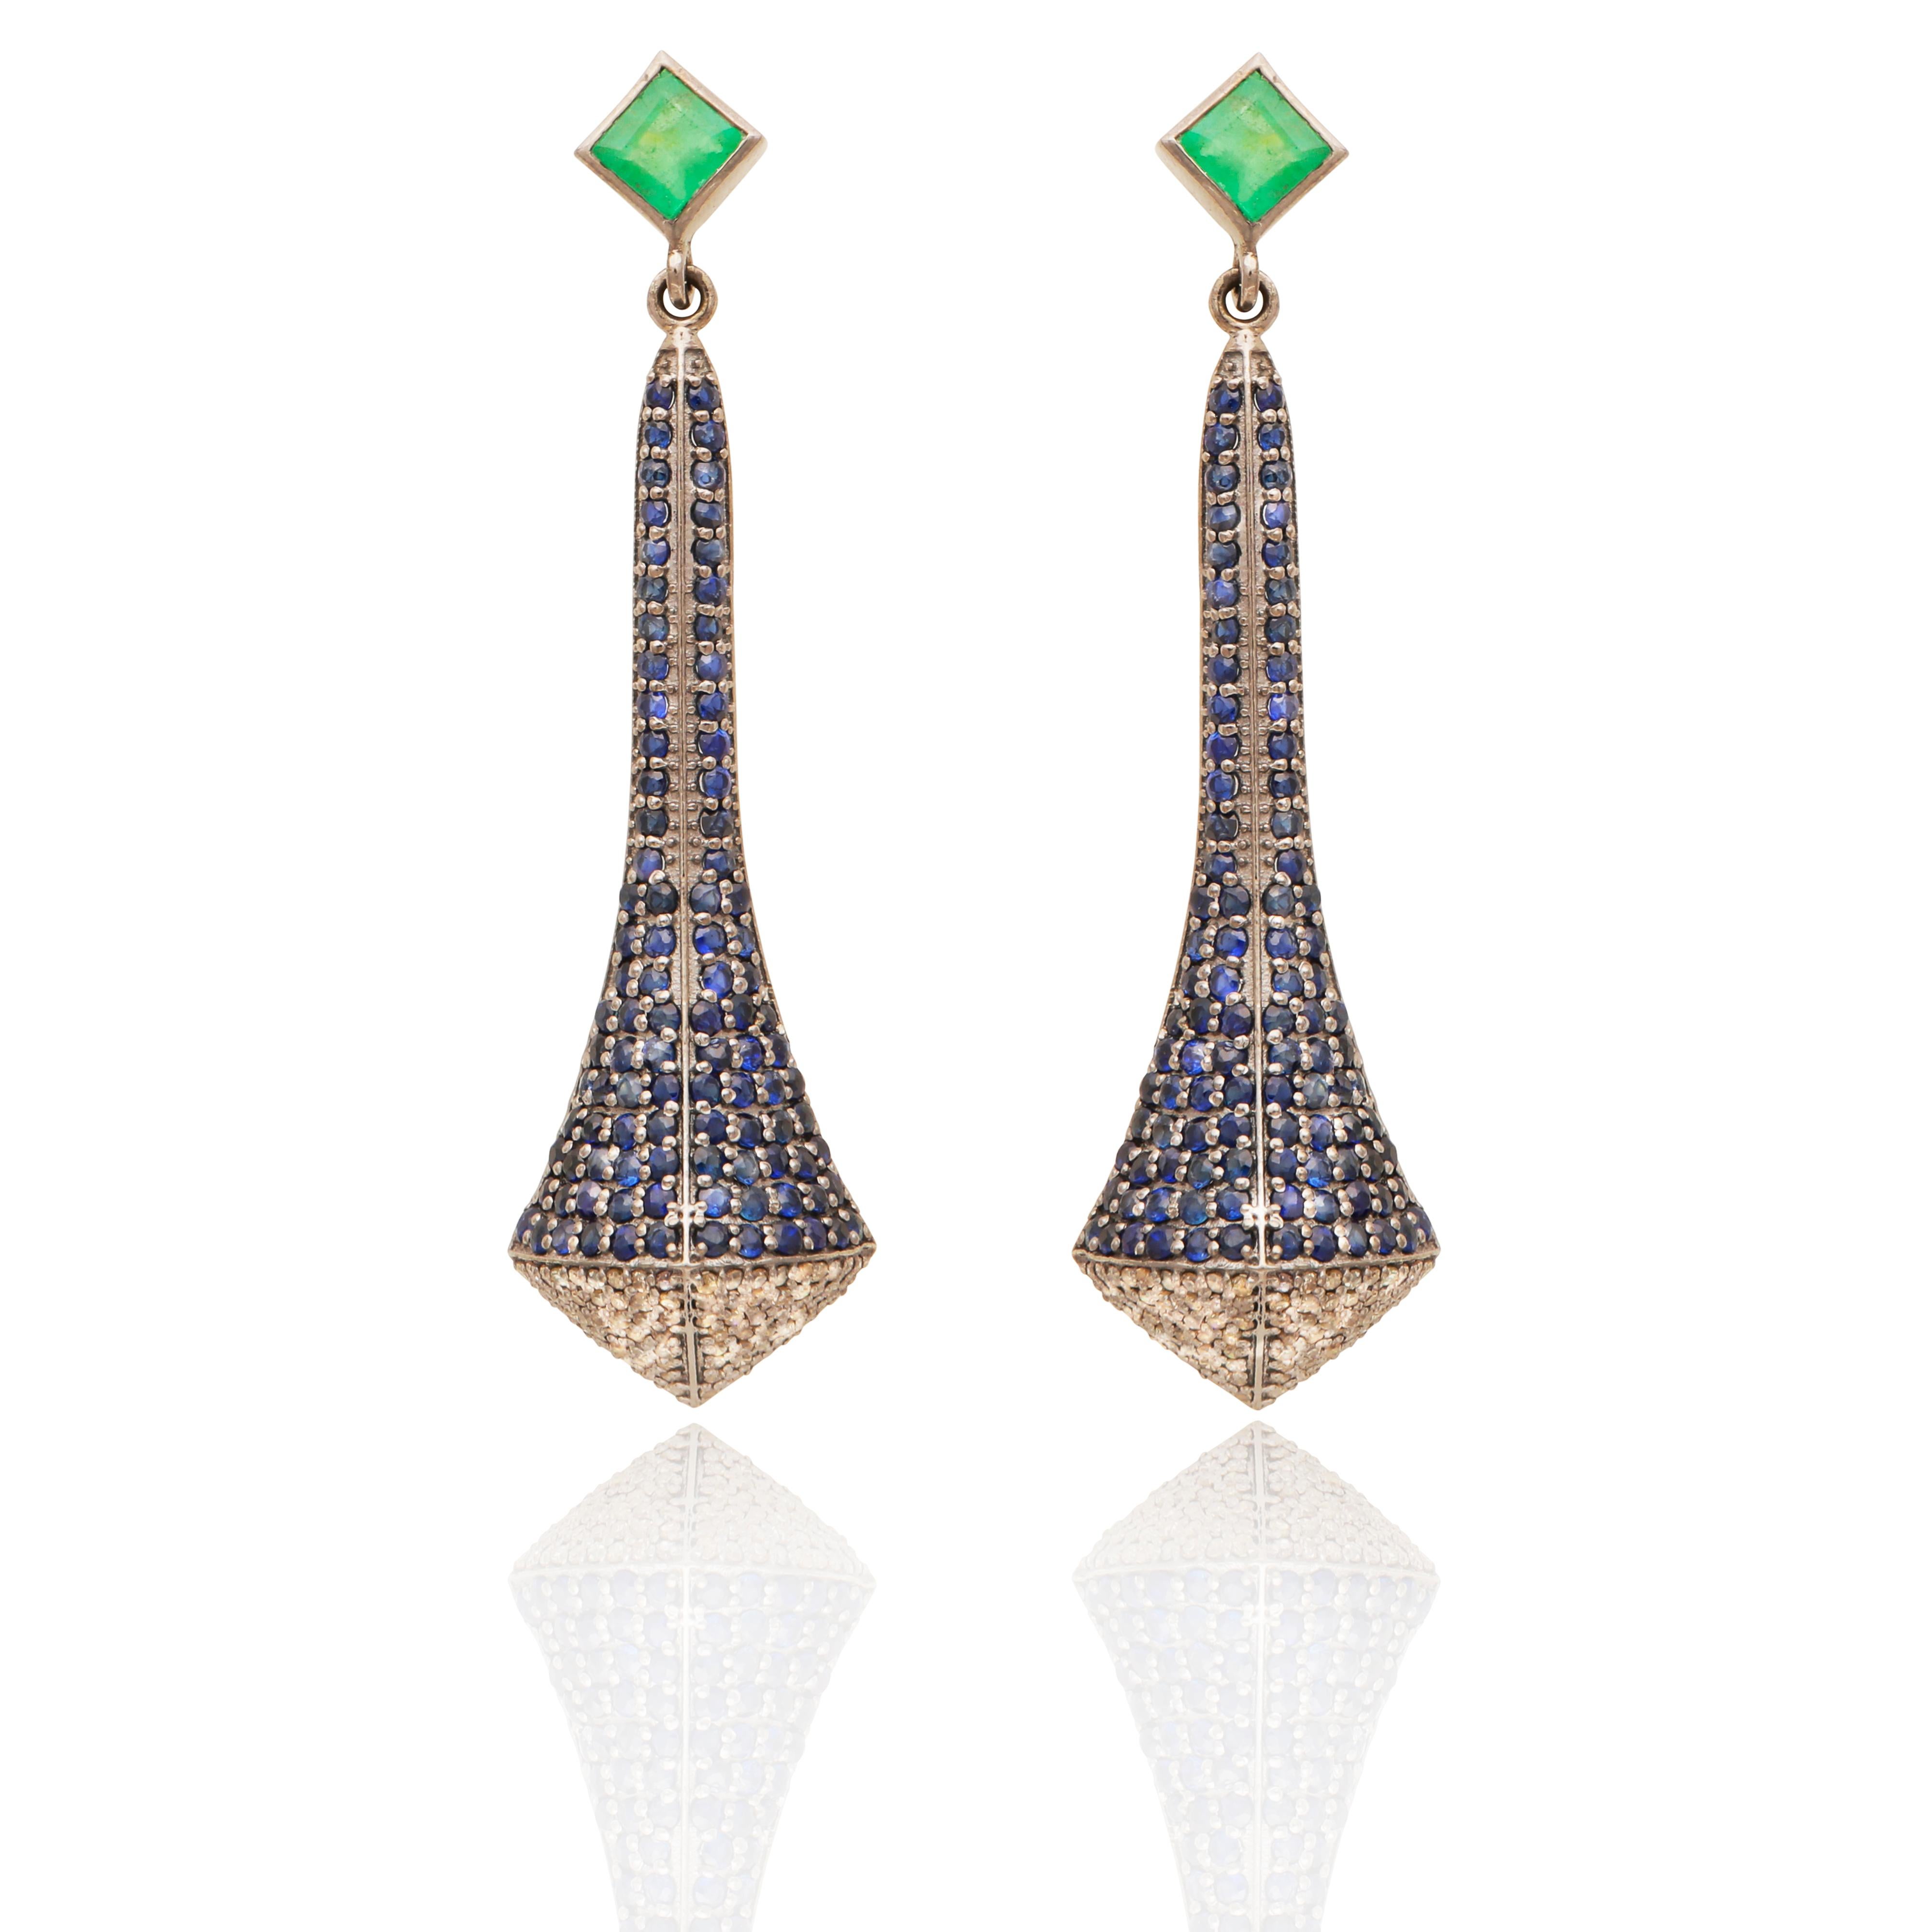 An Art Deco Style pair of earrings set with single cut pave diamonds and emeralds. Set on 925 oxidized silver to give an old feel and ear backs all in 14 kt gold.

1.252 carat sappphire; 0.180 carat emerald; 0.90 grams 14 kt gold; 7.098 grams